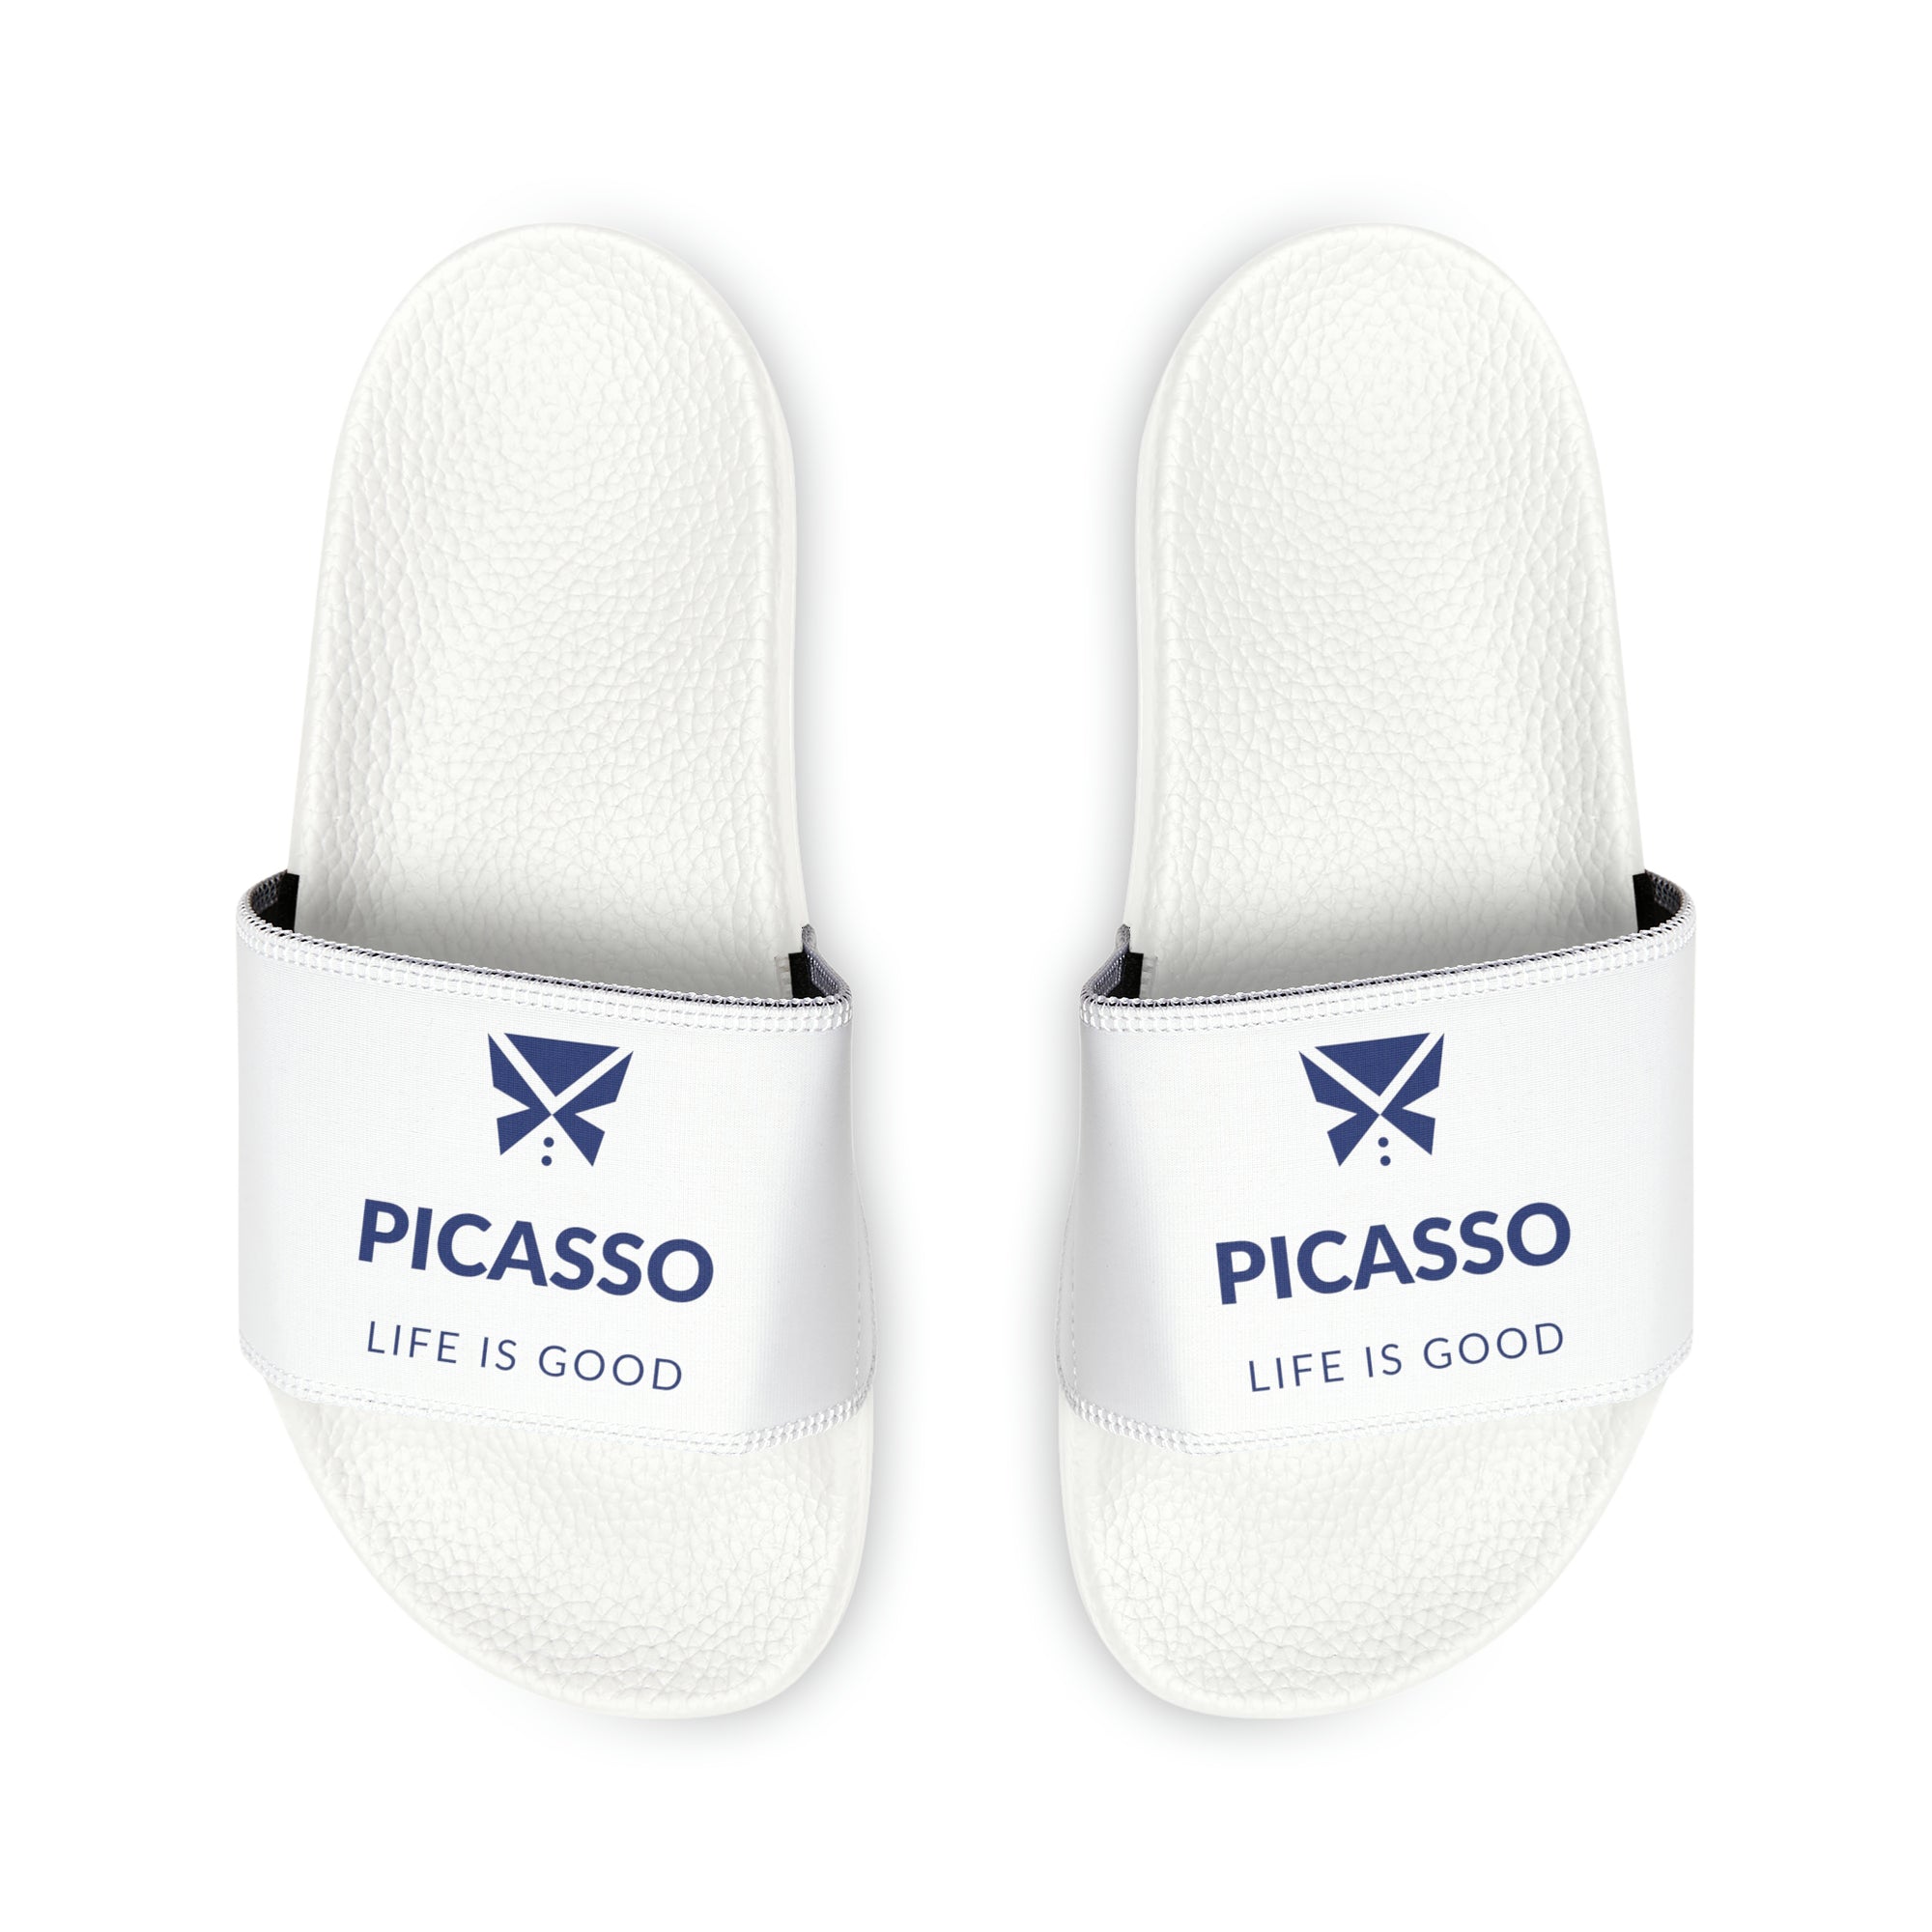 Picasso- Life is Good Sandals